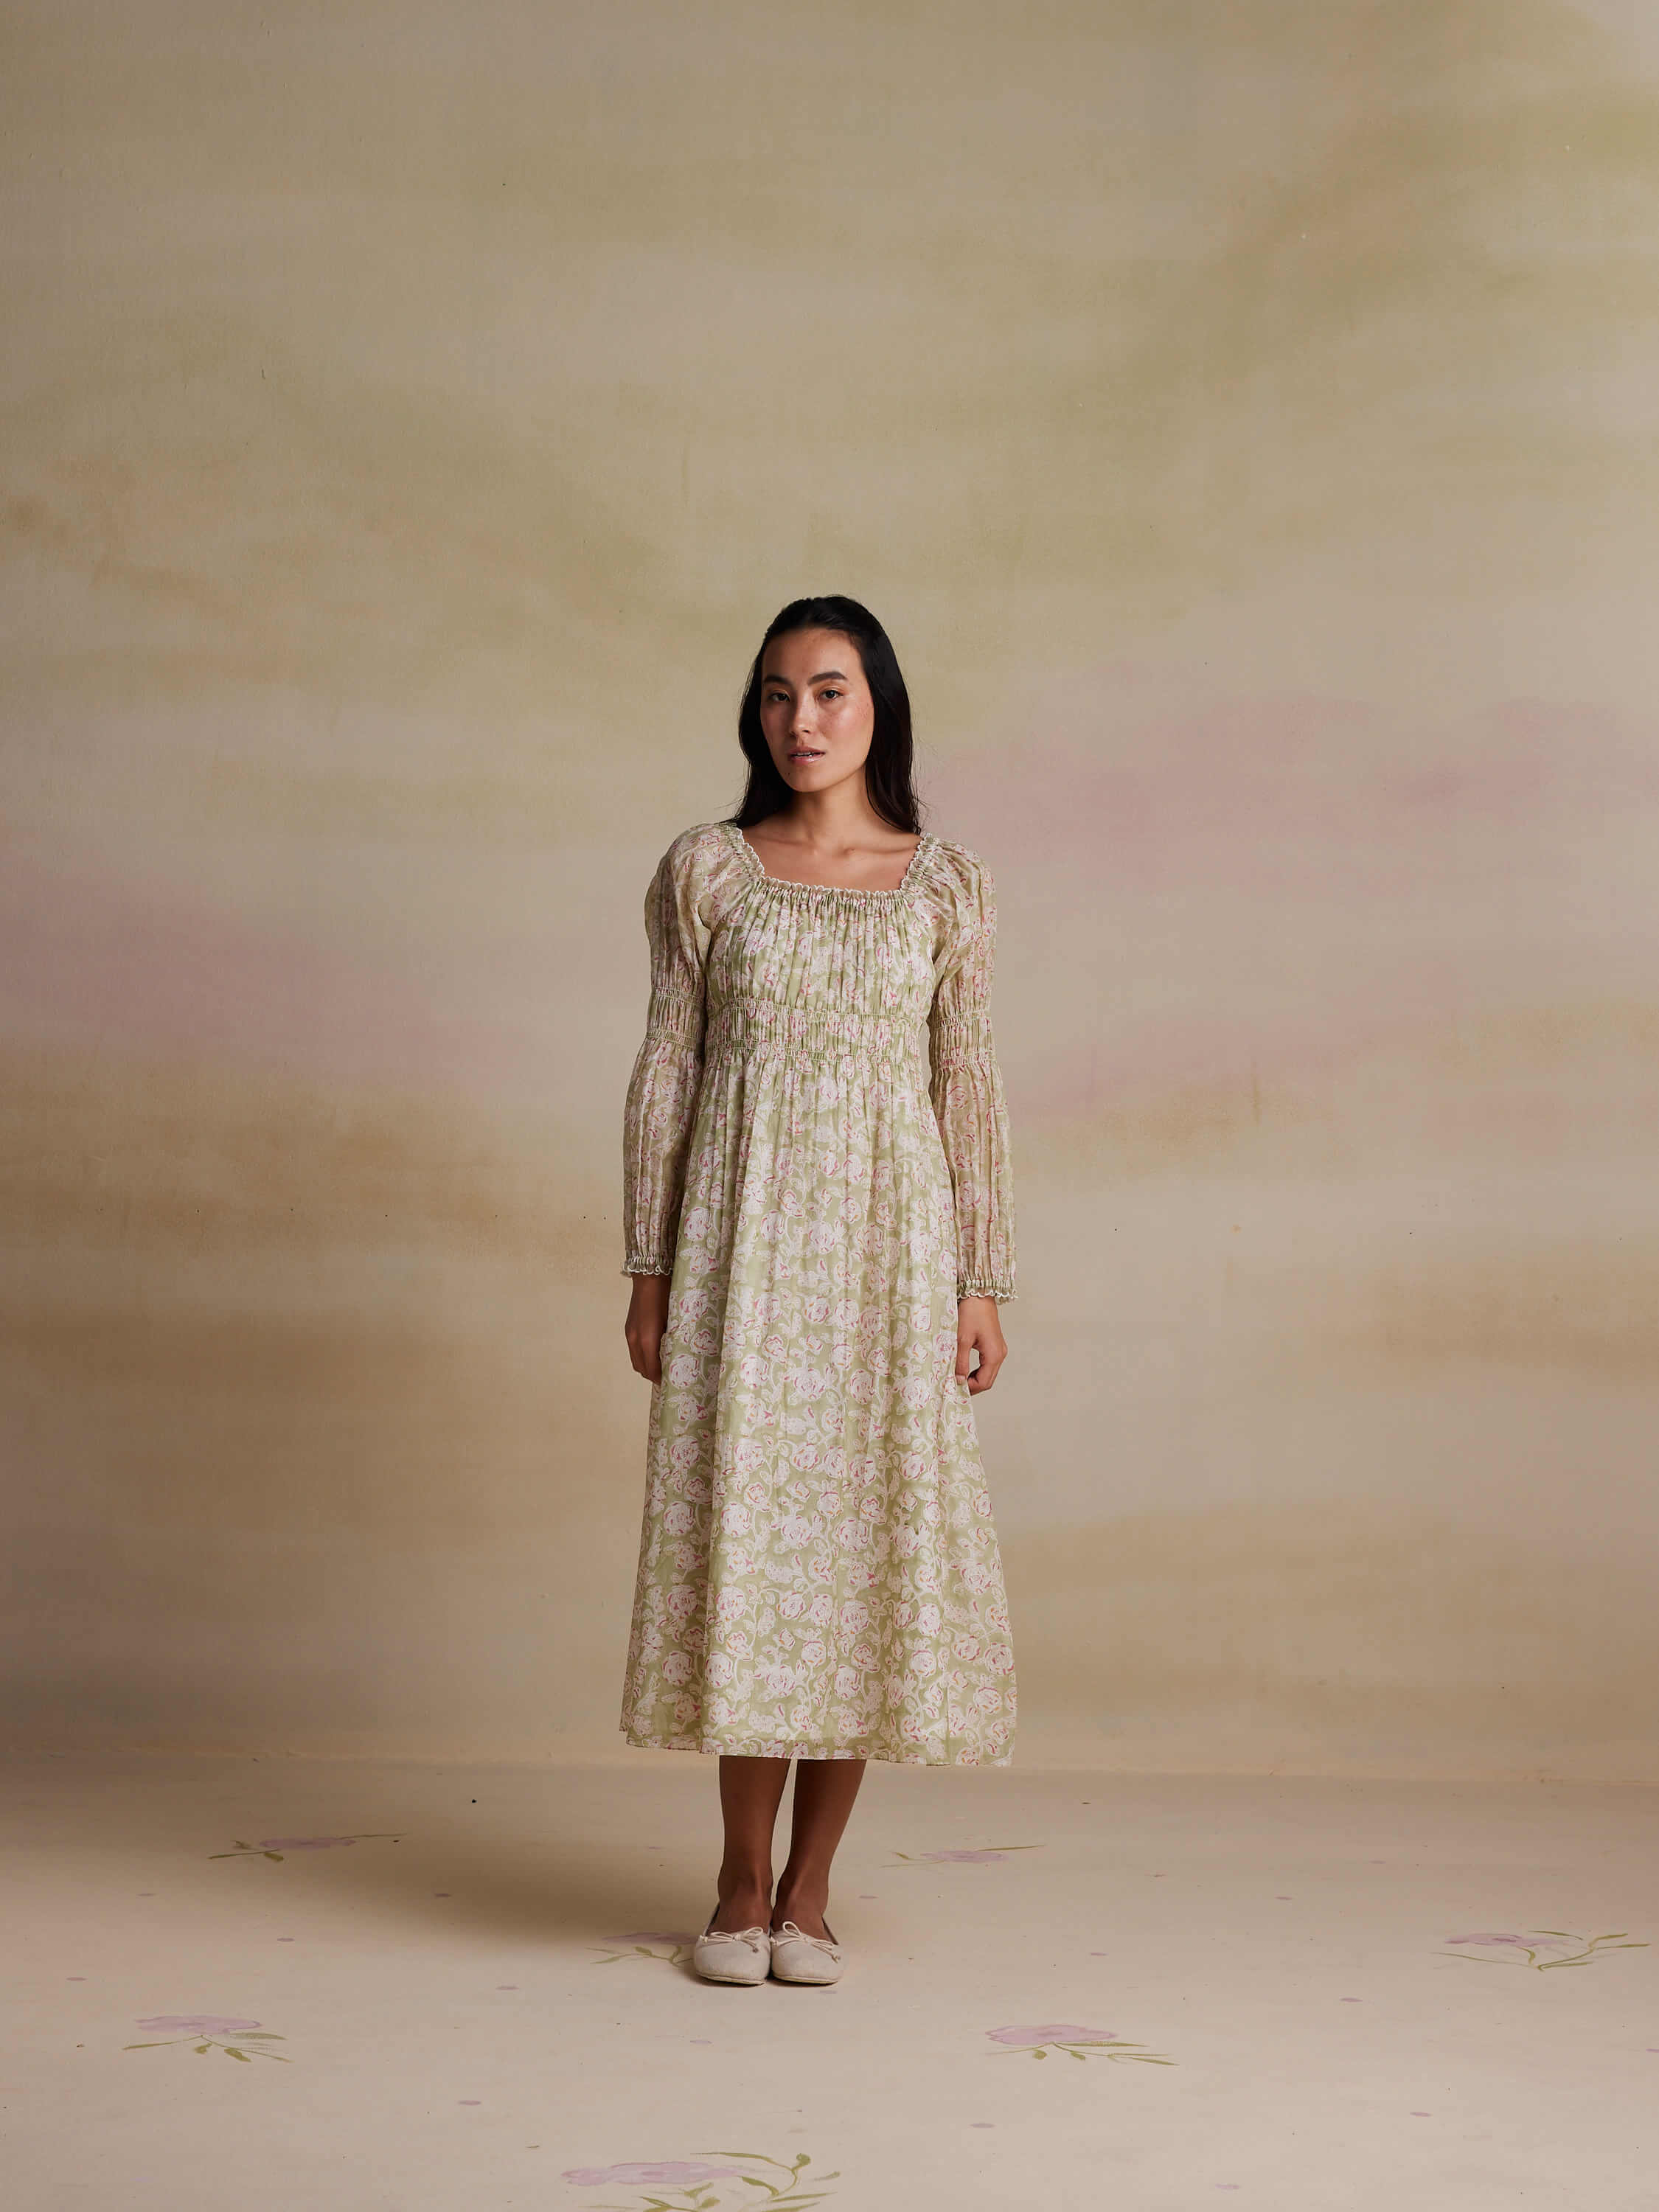 Woman in a long floral dress posing against a neutral background.